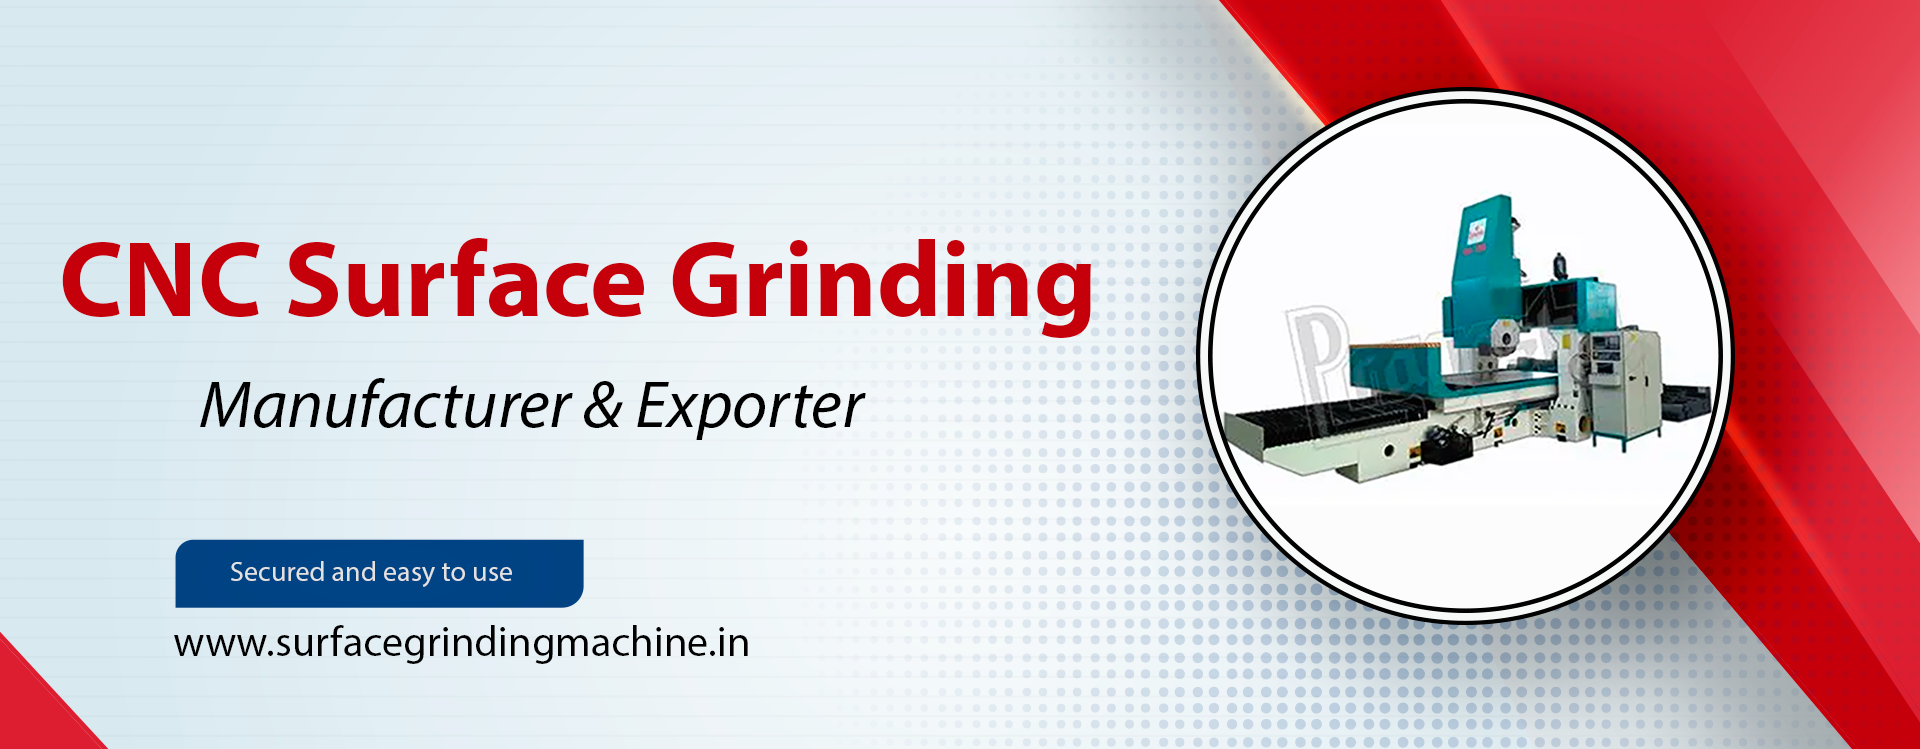 Surface Grinding Machine Manufacturer in India.